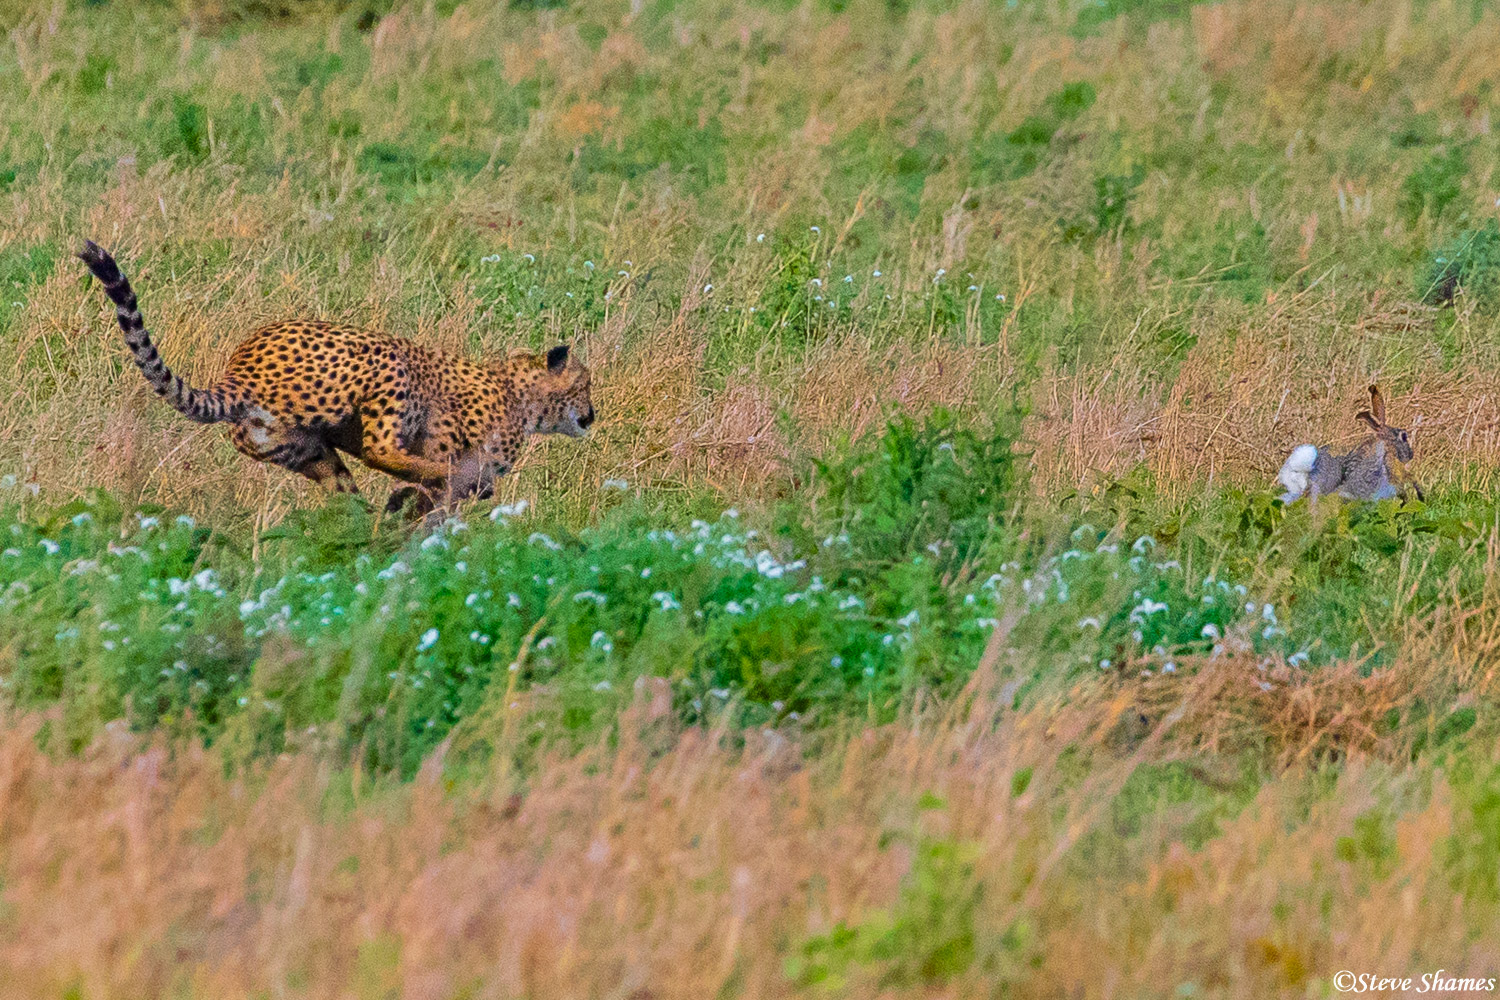 Mother cheetah at full speed chasing a rabbit. It's very hard to get a clear photo when they are zigzagging at full speed.